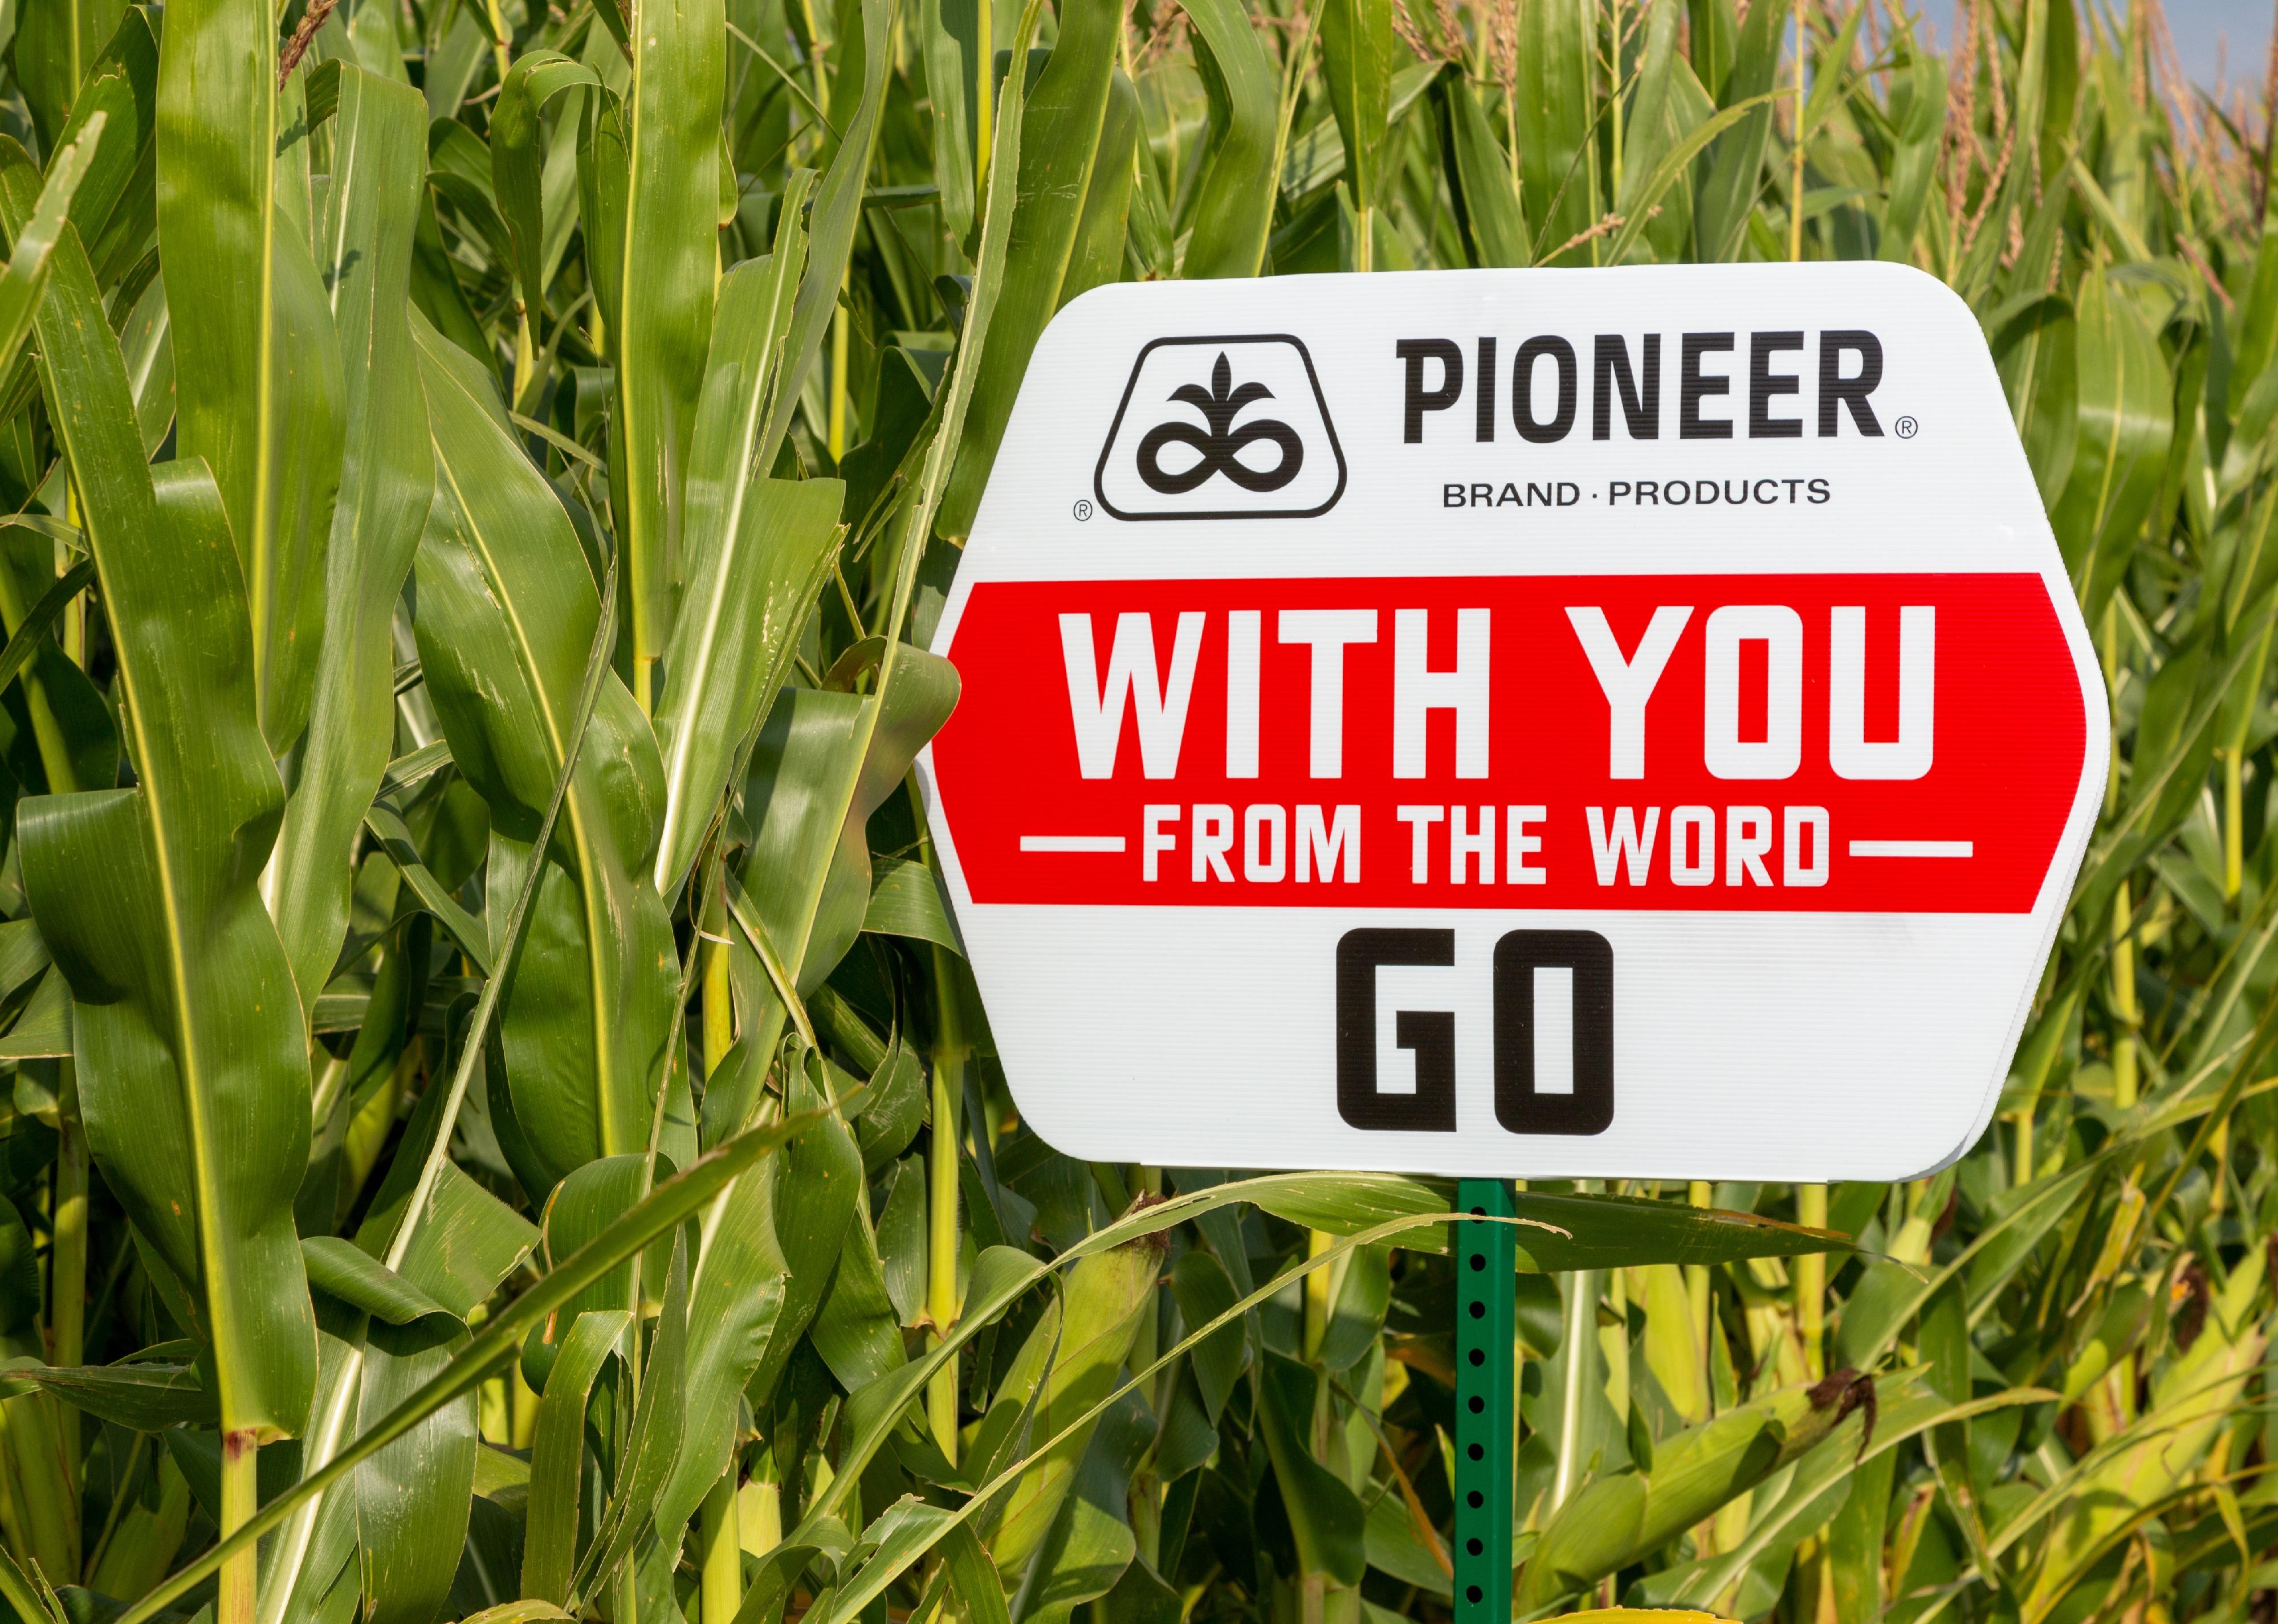 Pioneer seed sign and trademark logo in field of corn.